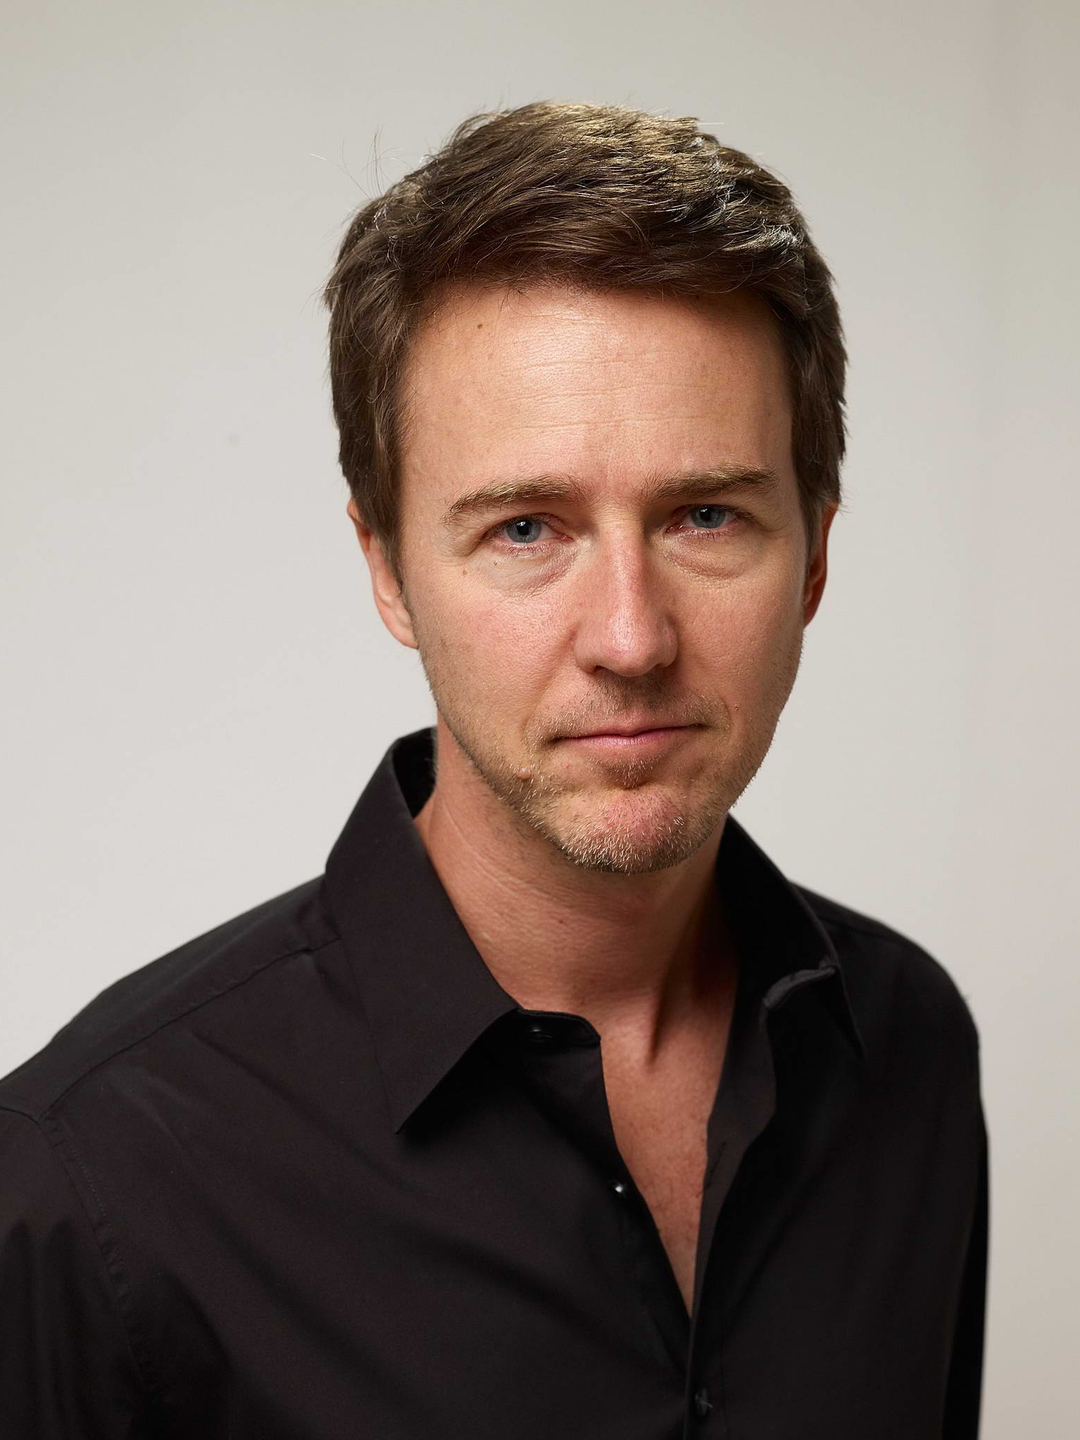 Edward Norton who are his parents